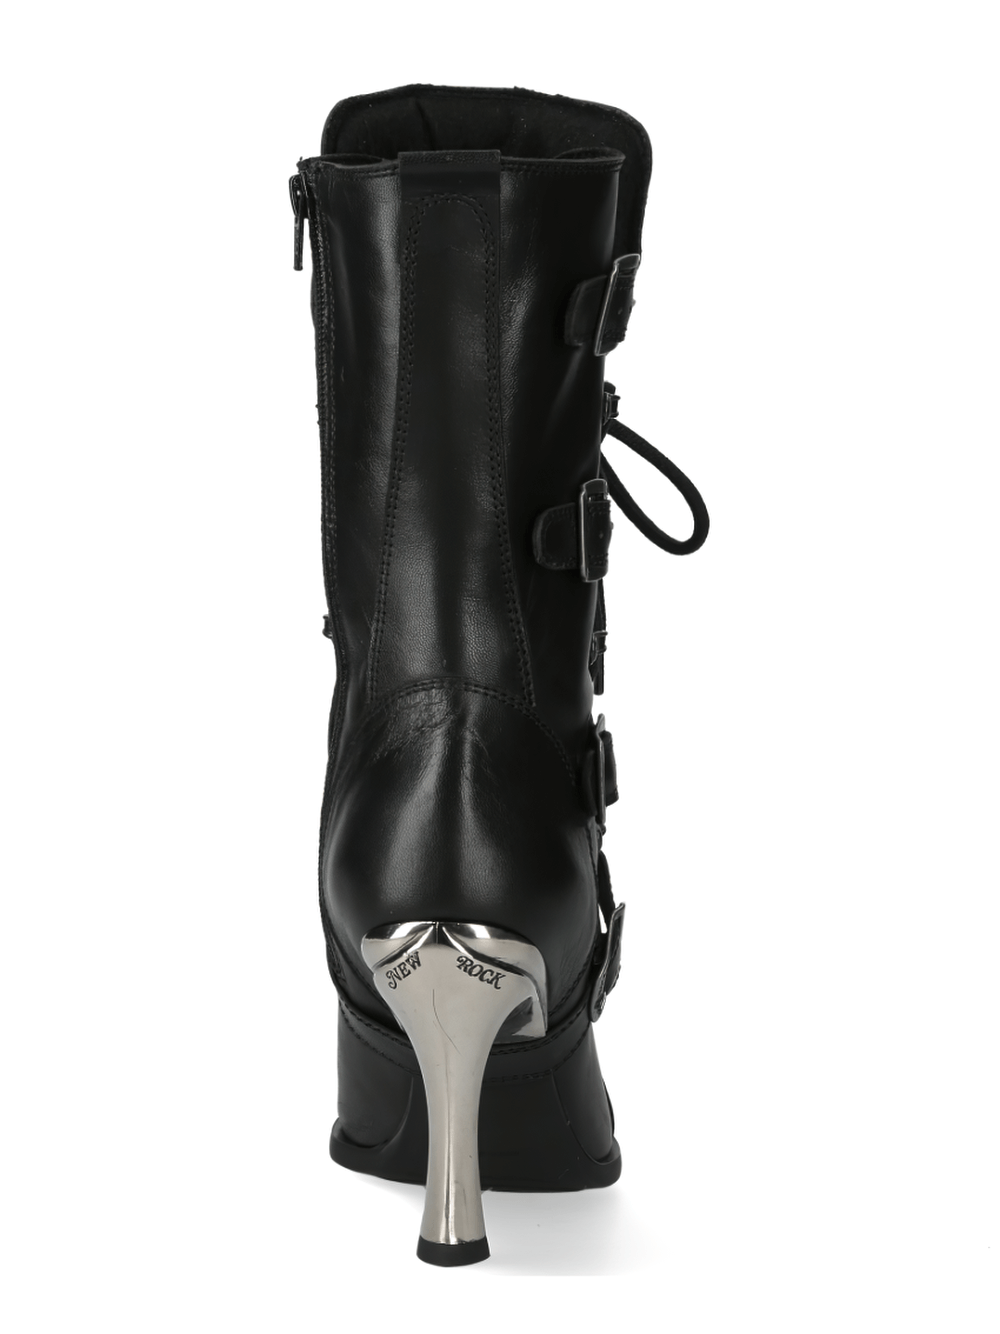 NEW ROCK Black Lace-Up High Heel Boots with Buckle Details